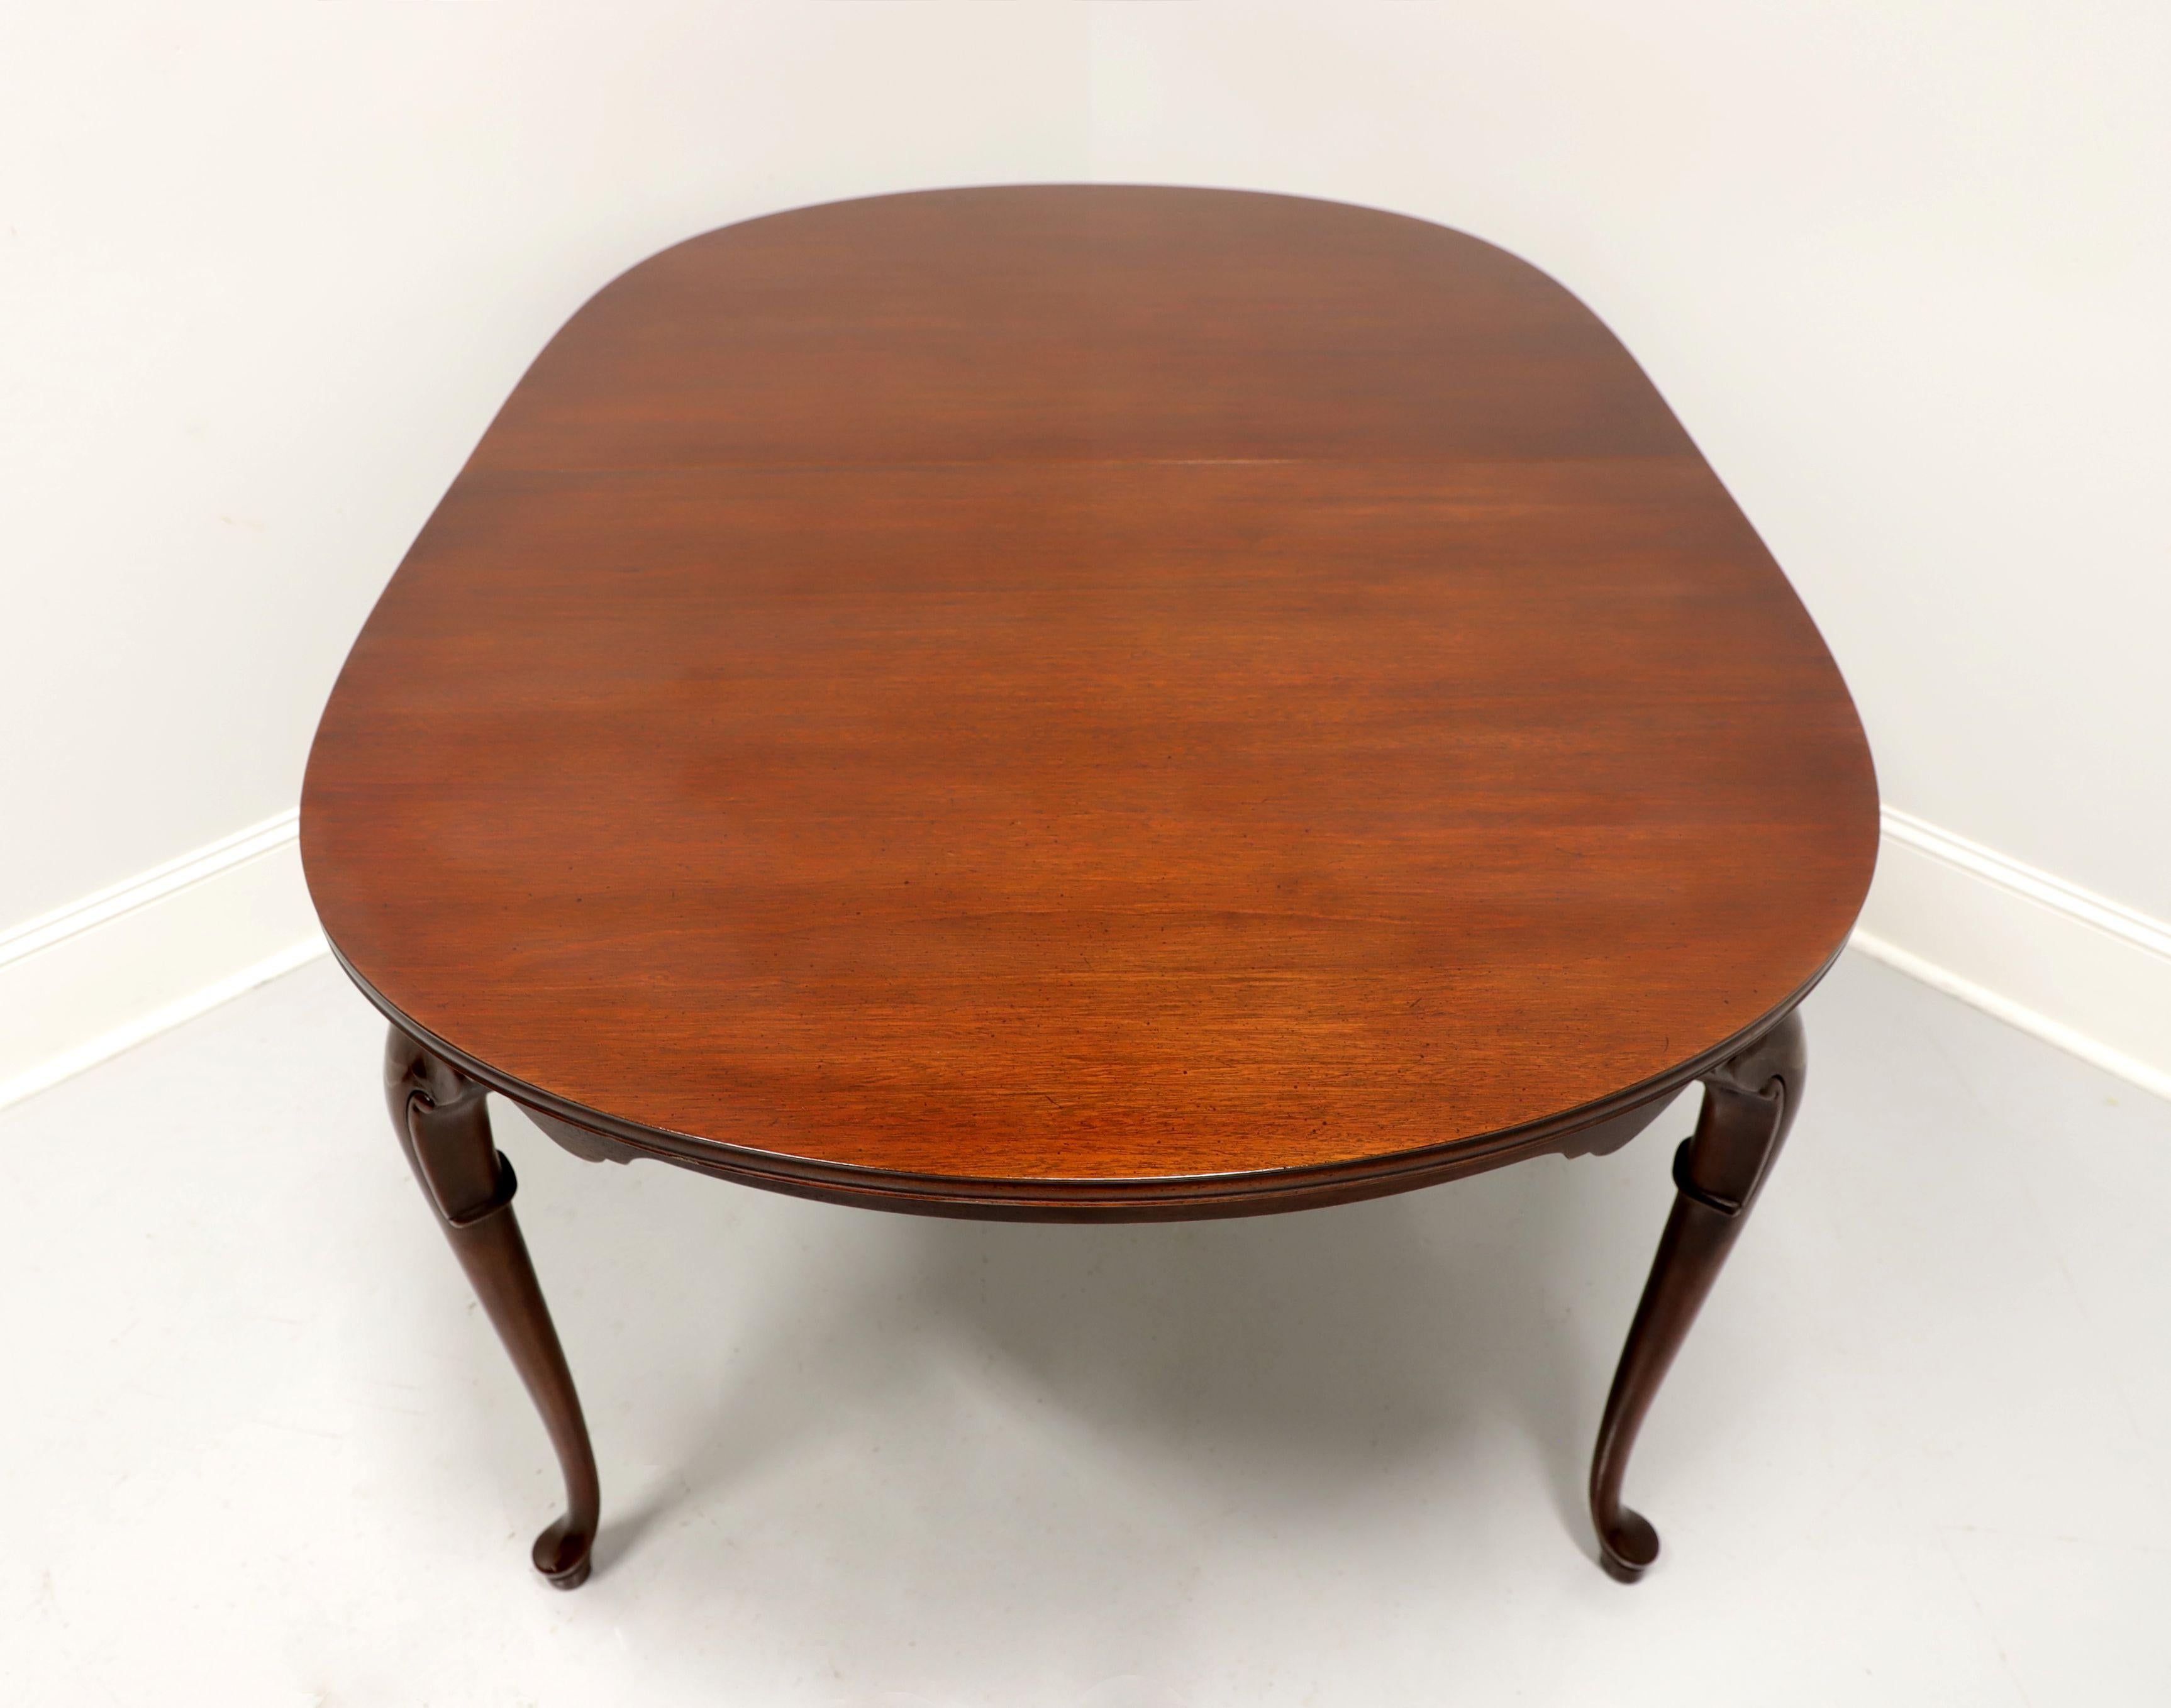 A Queen Anne style oval dining table by high-quality furniture maker Hickory Chair. Mahogany with solid top, carved apron, decorative knees, cabriole legs and pad feet. Metal expansion sliders. Includes two extension leaves. Made in the USA, in the